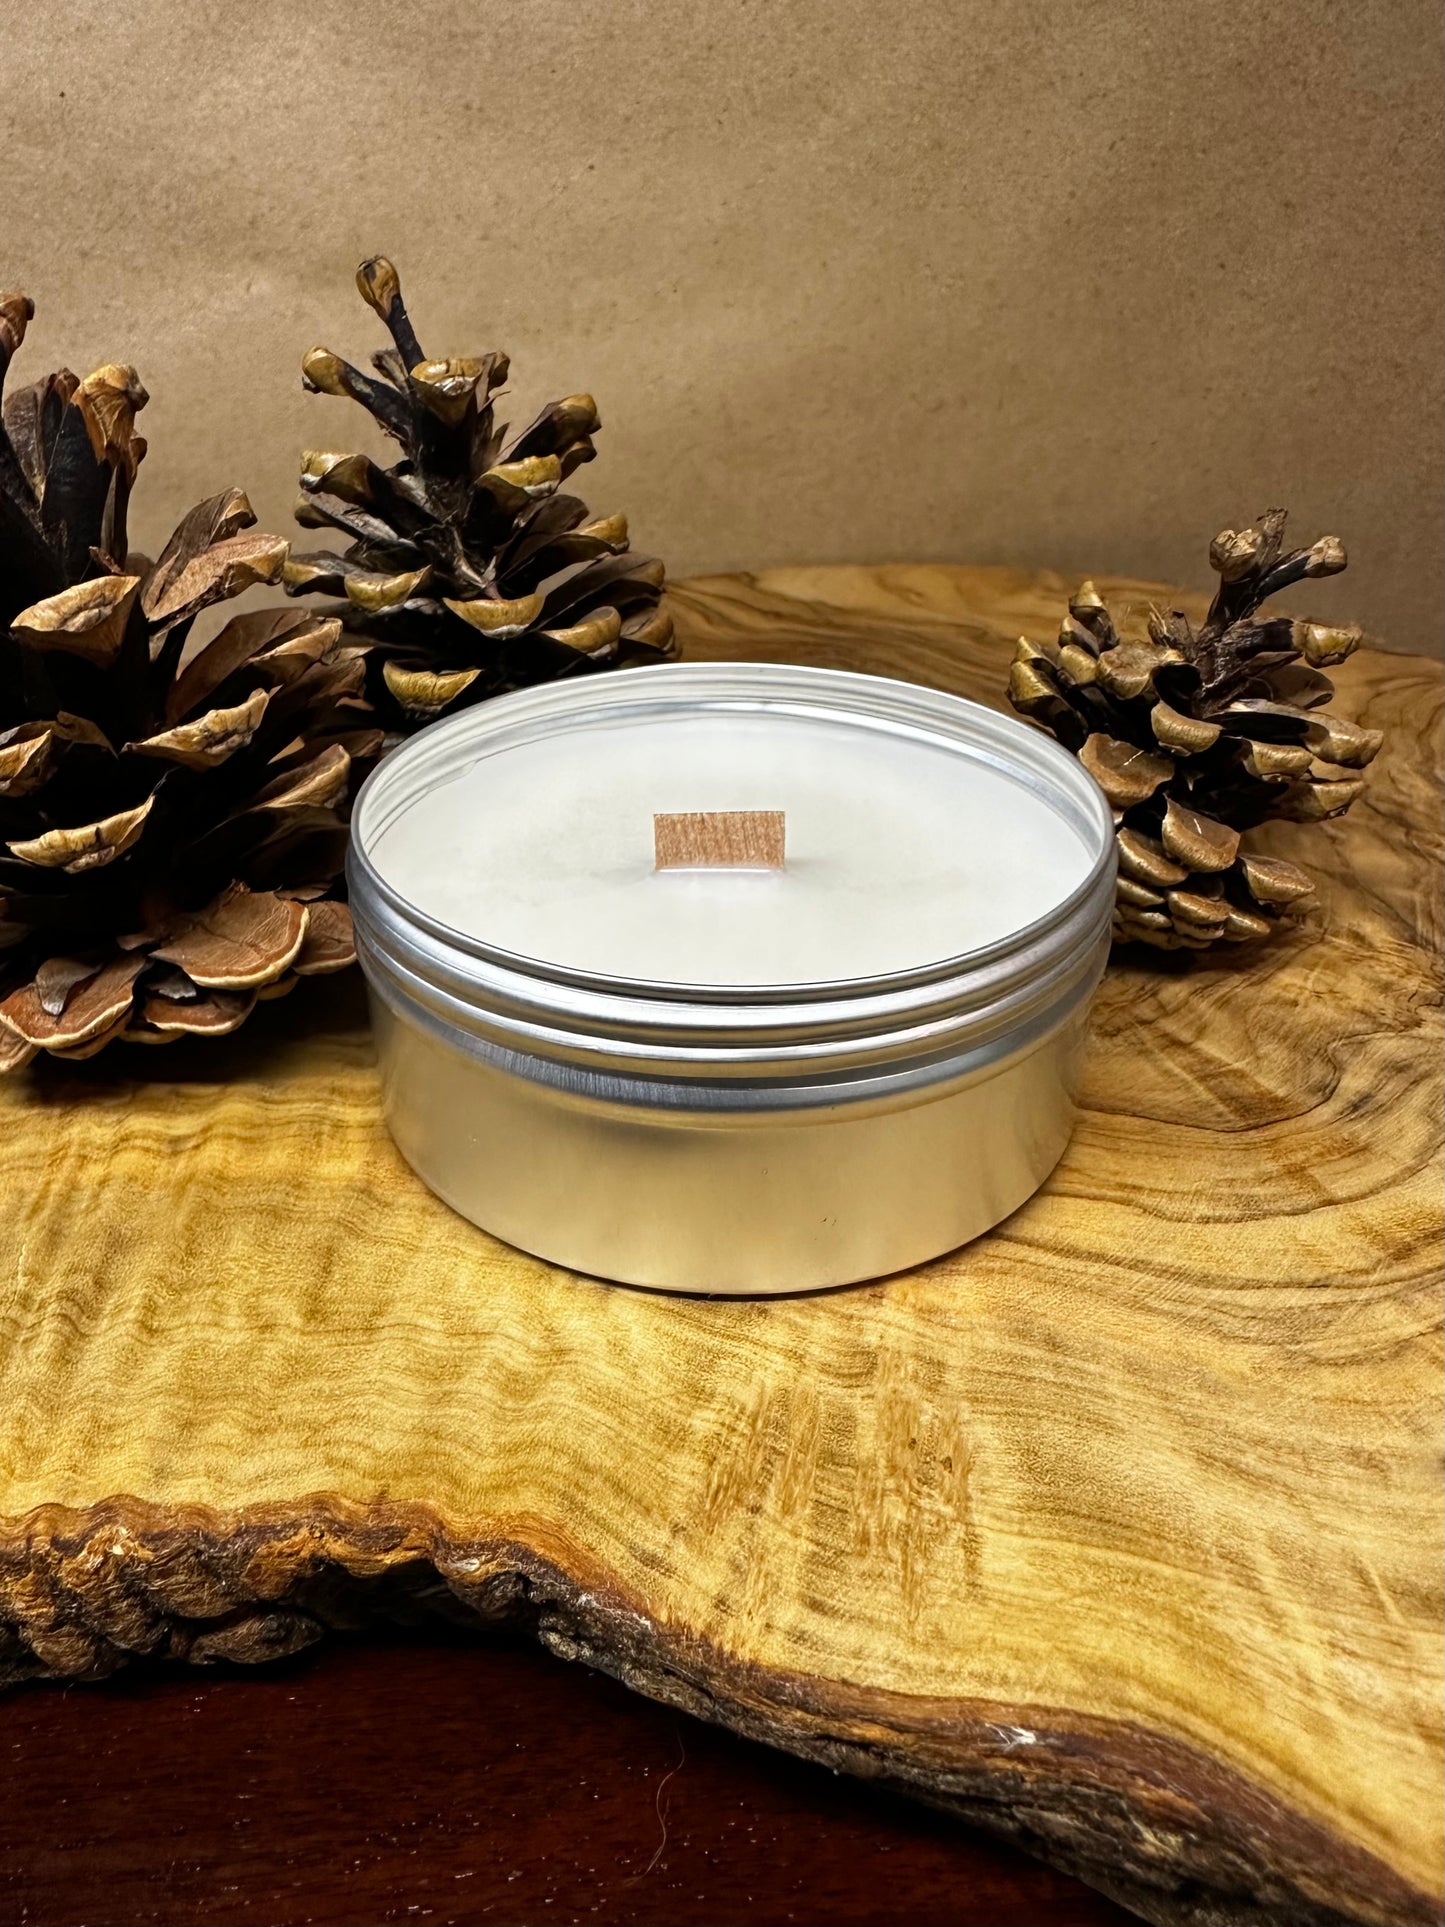 Skagit Wild Peppermint, Pine and Clove 4oz. Candle